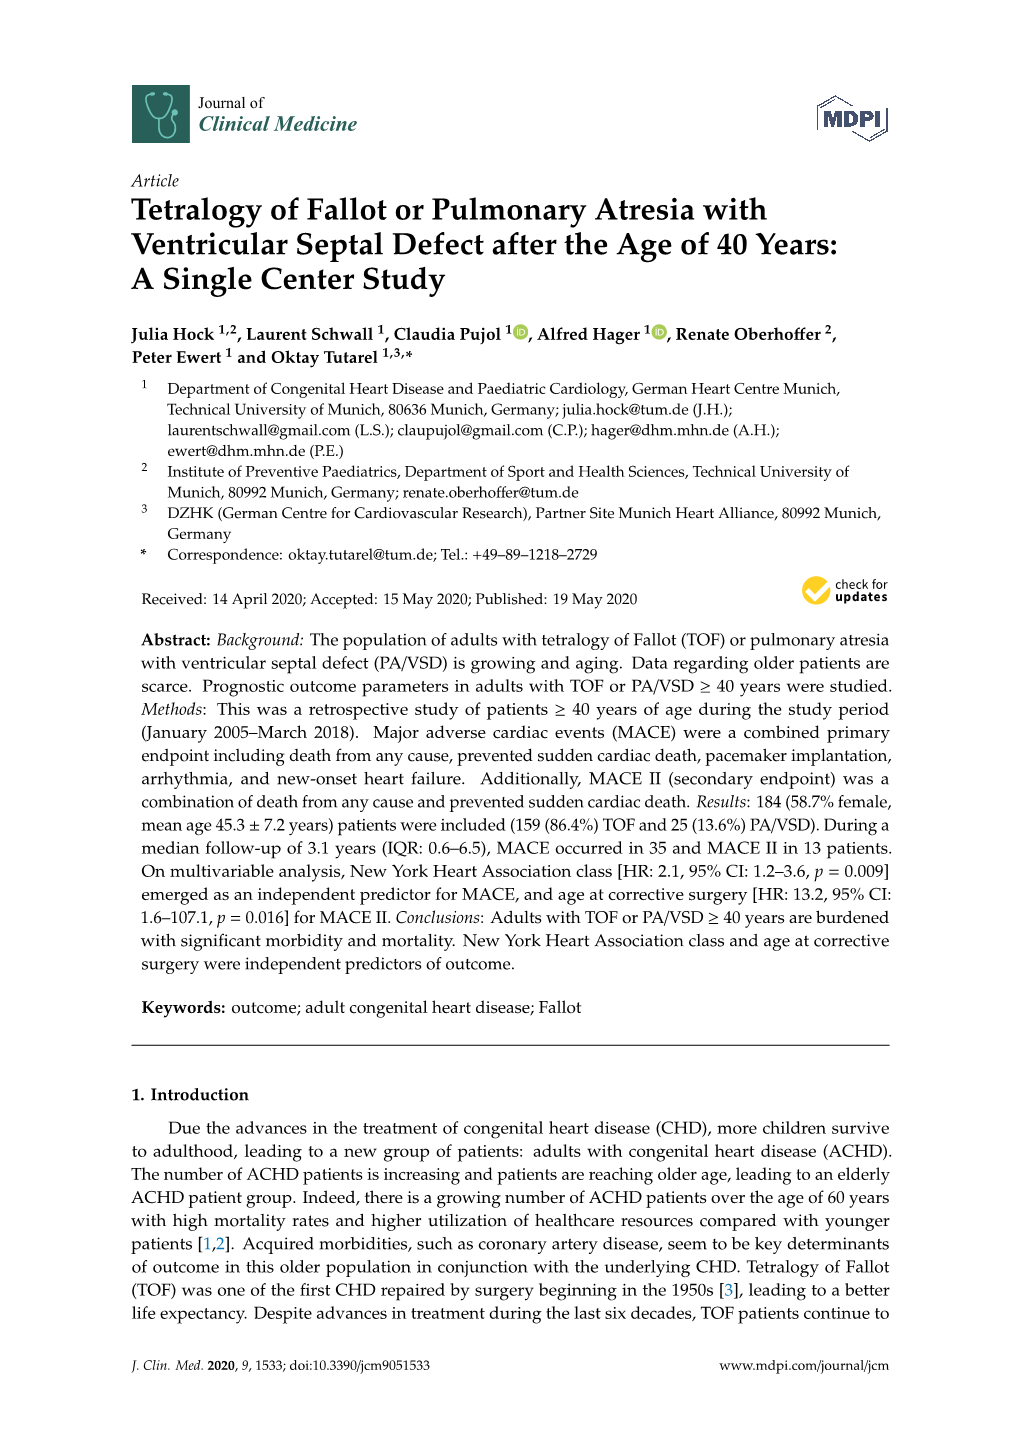 Tetralogy of Fallot Or Pulmonary Atresia with Ventricular Septal Defect After the Age of 40 Years: a Single Center Study